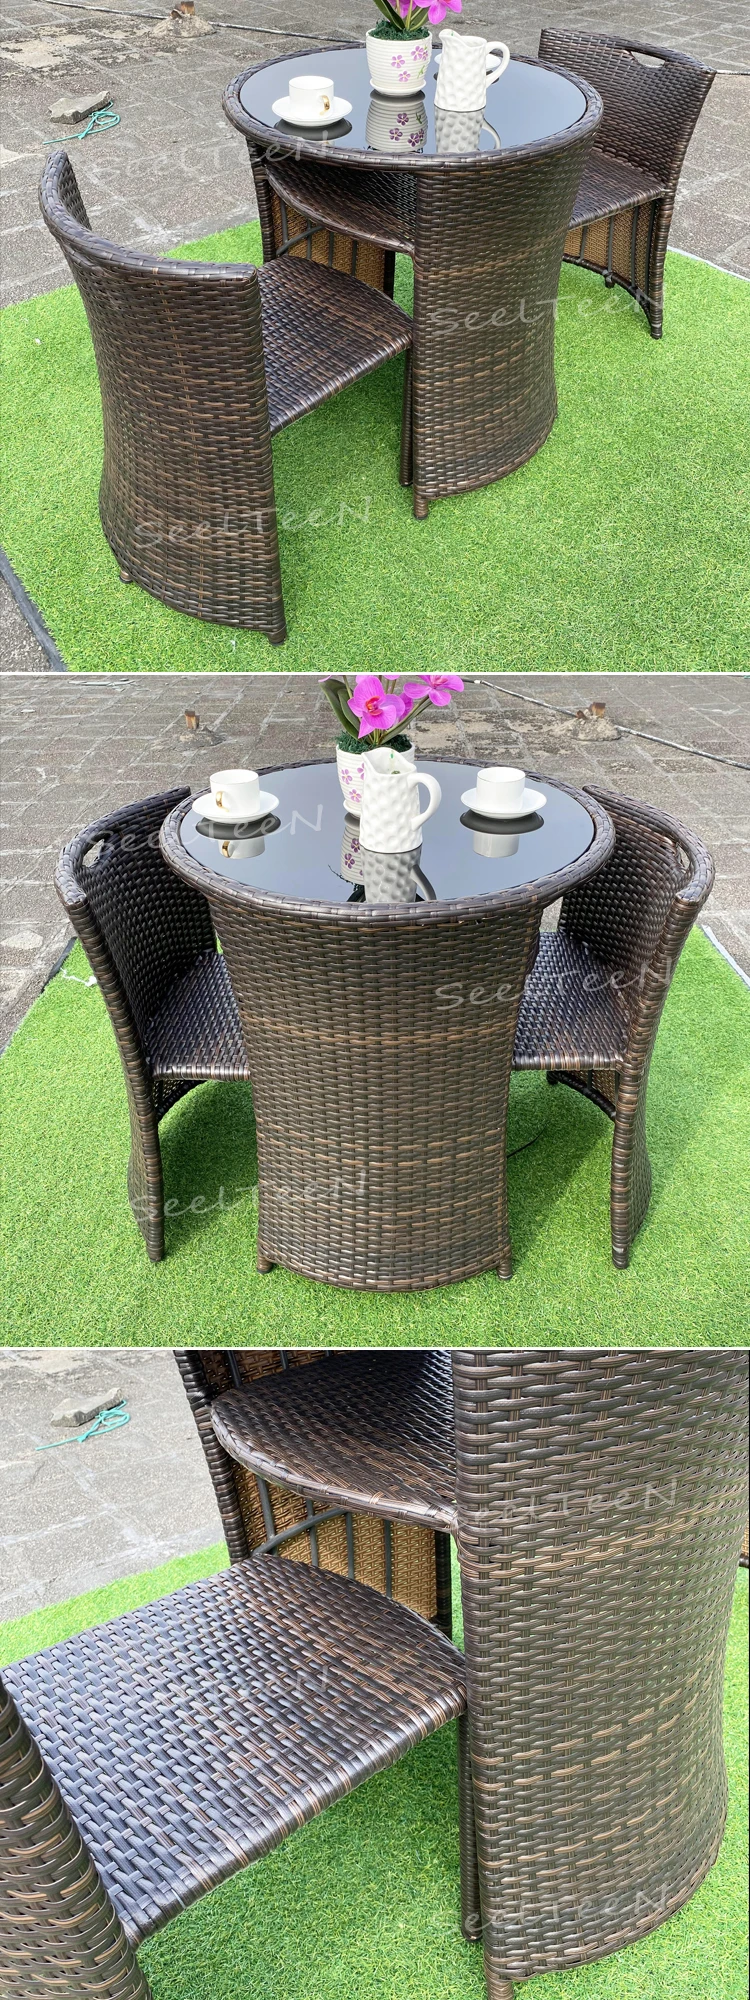 Hotel furniture bubble family party garden rattan lounge chair outdoor